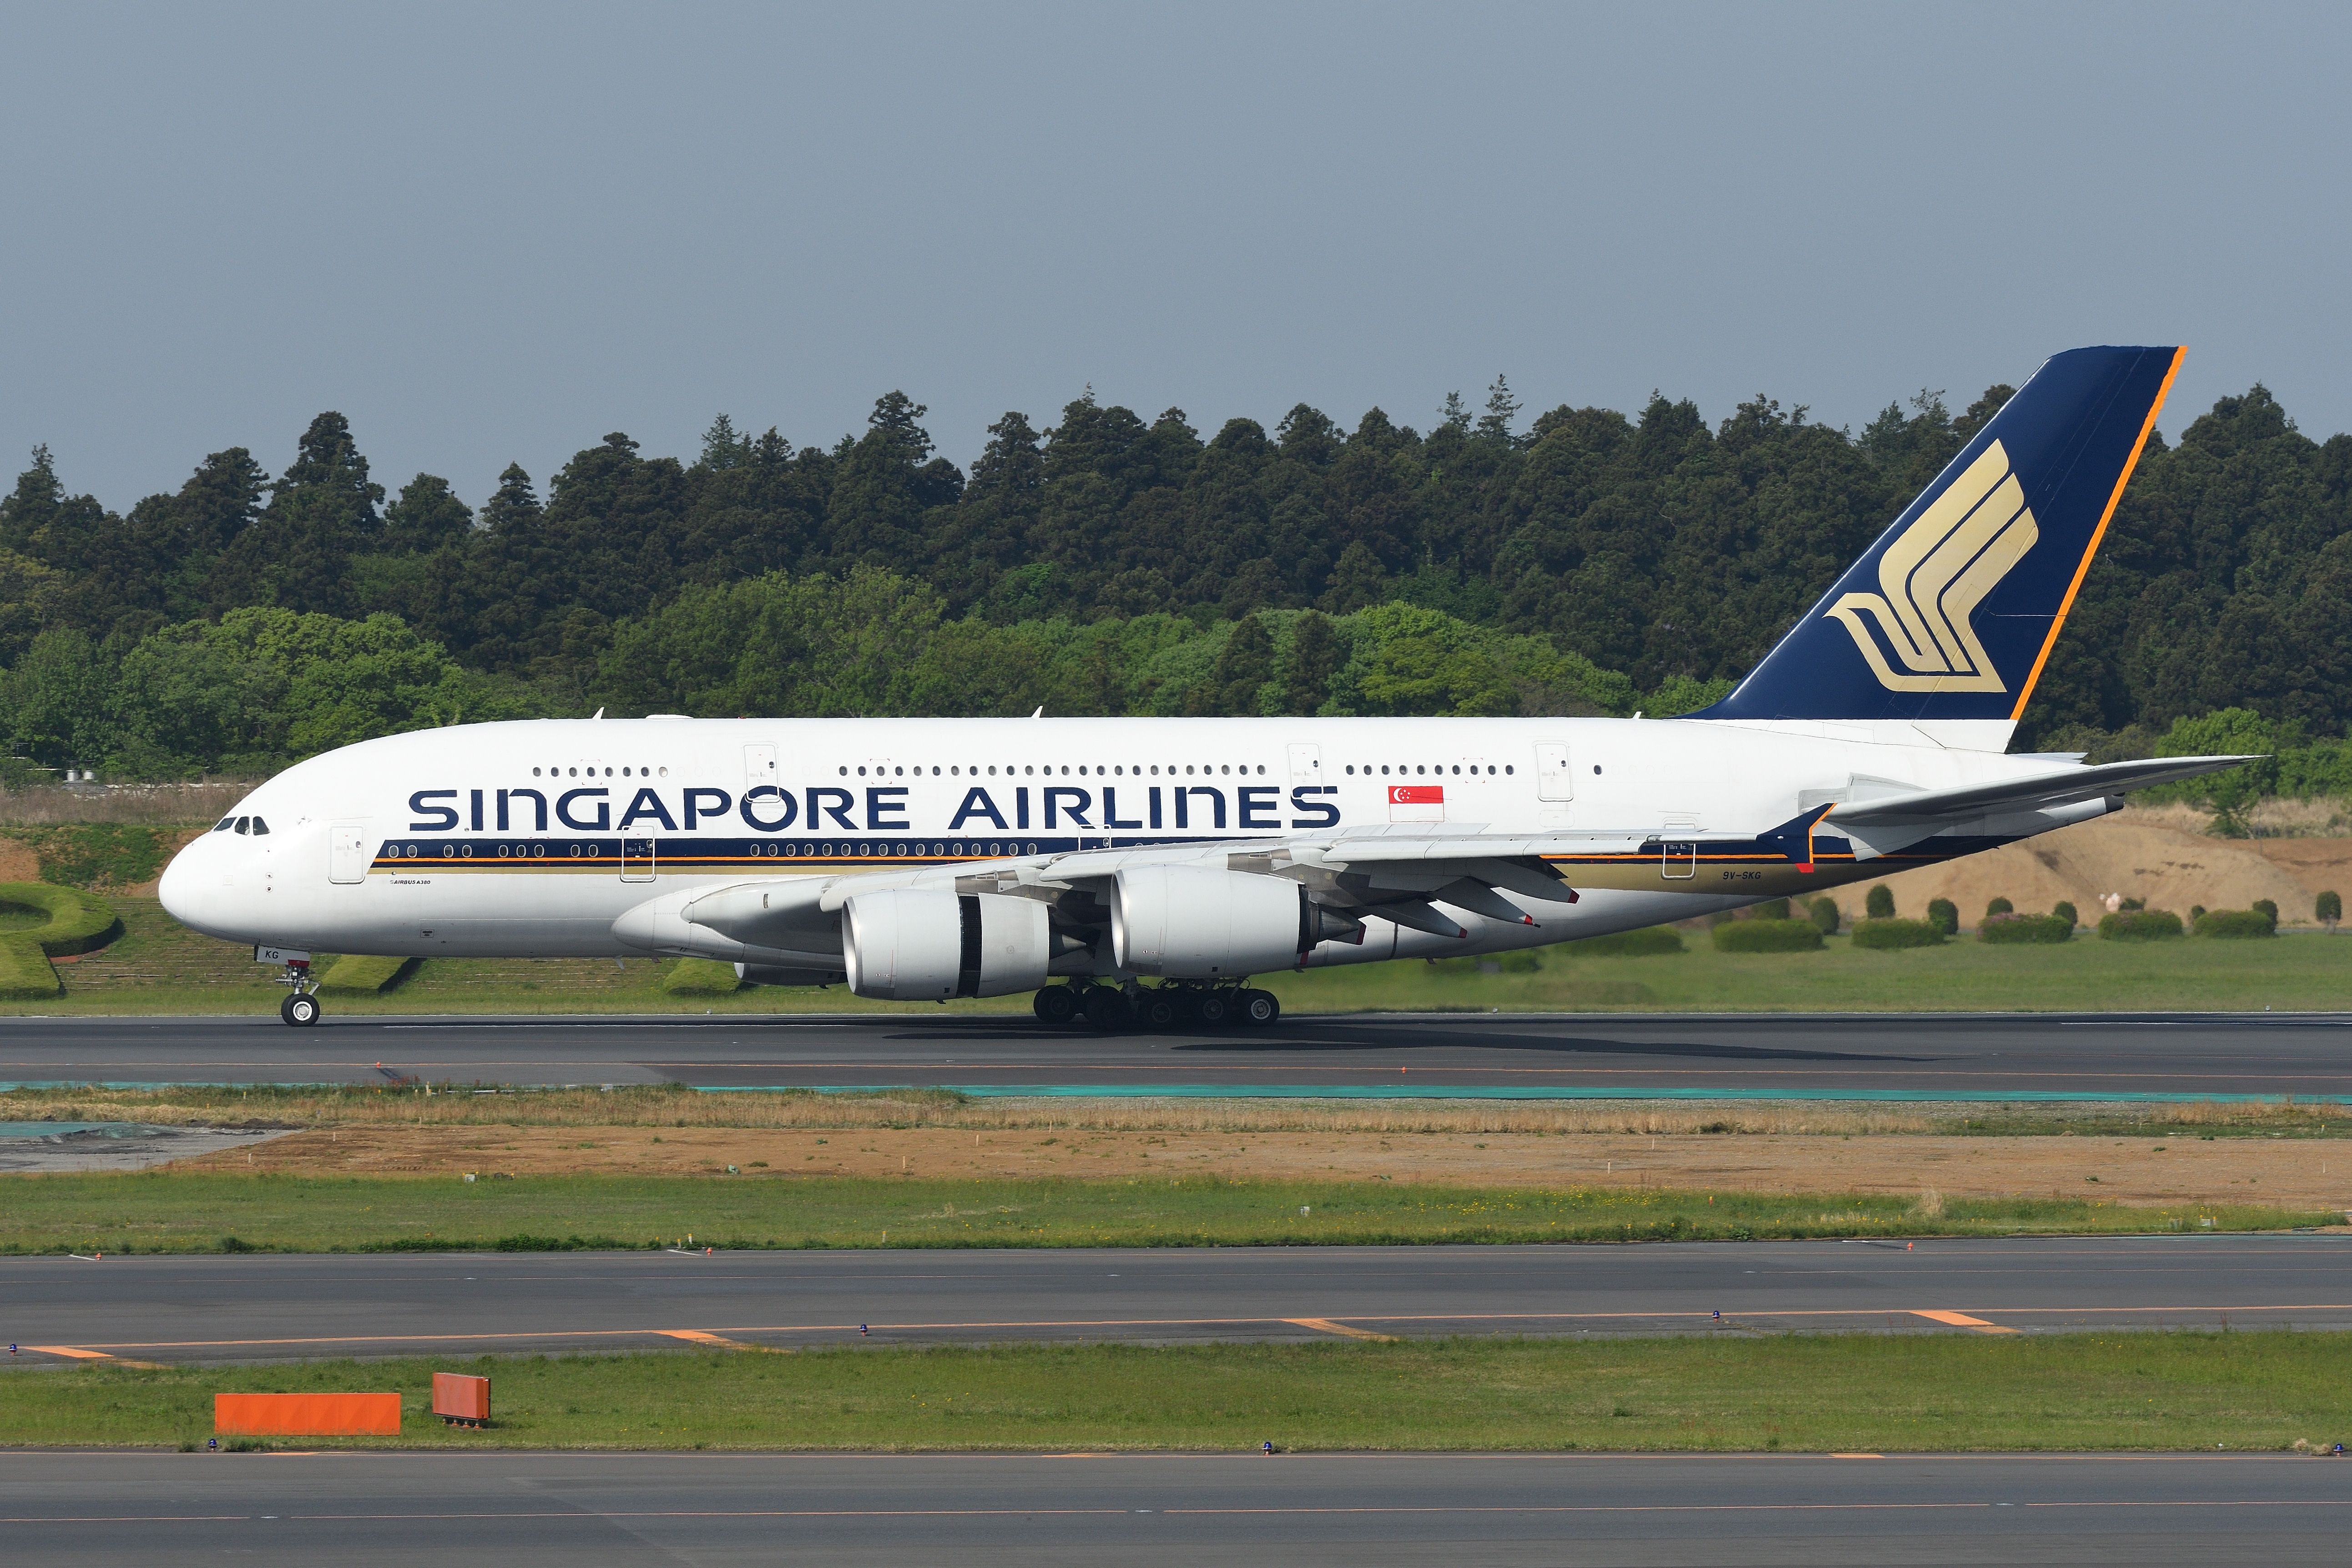 A Singapore Airlines Airbus A380 on an airport apron.